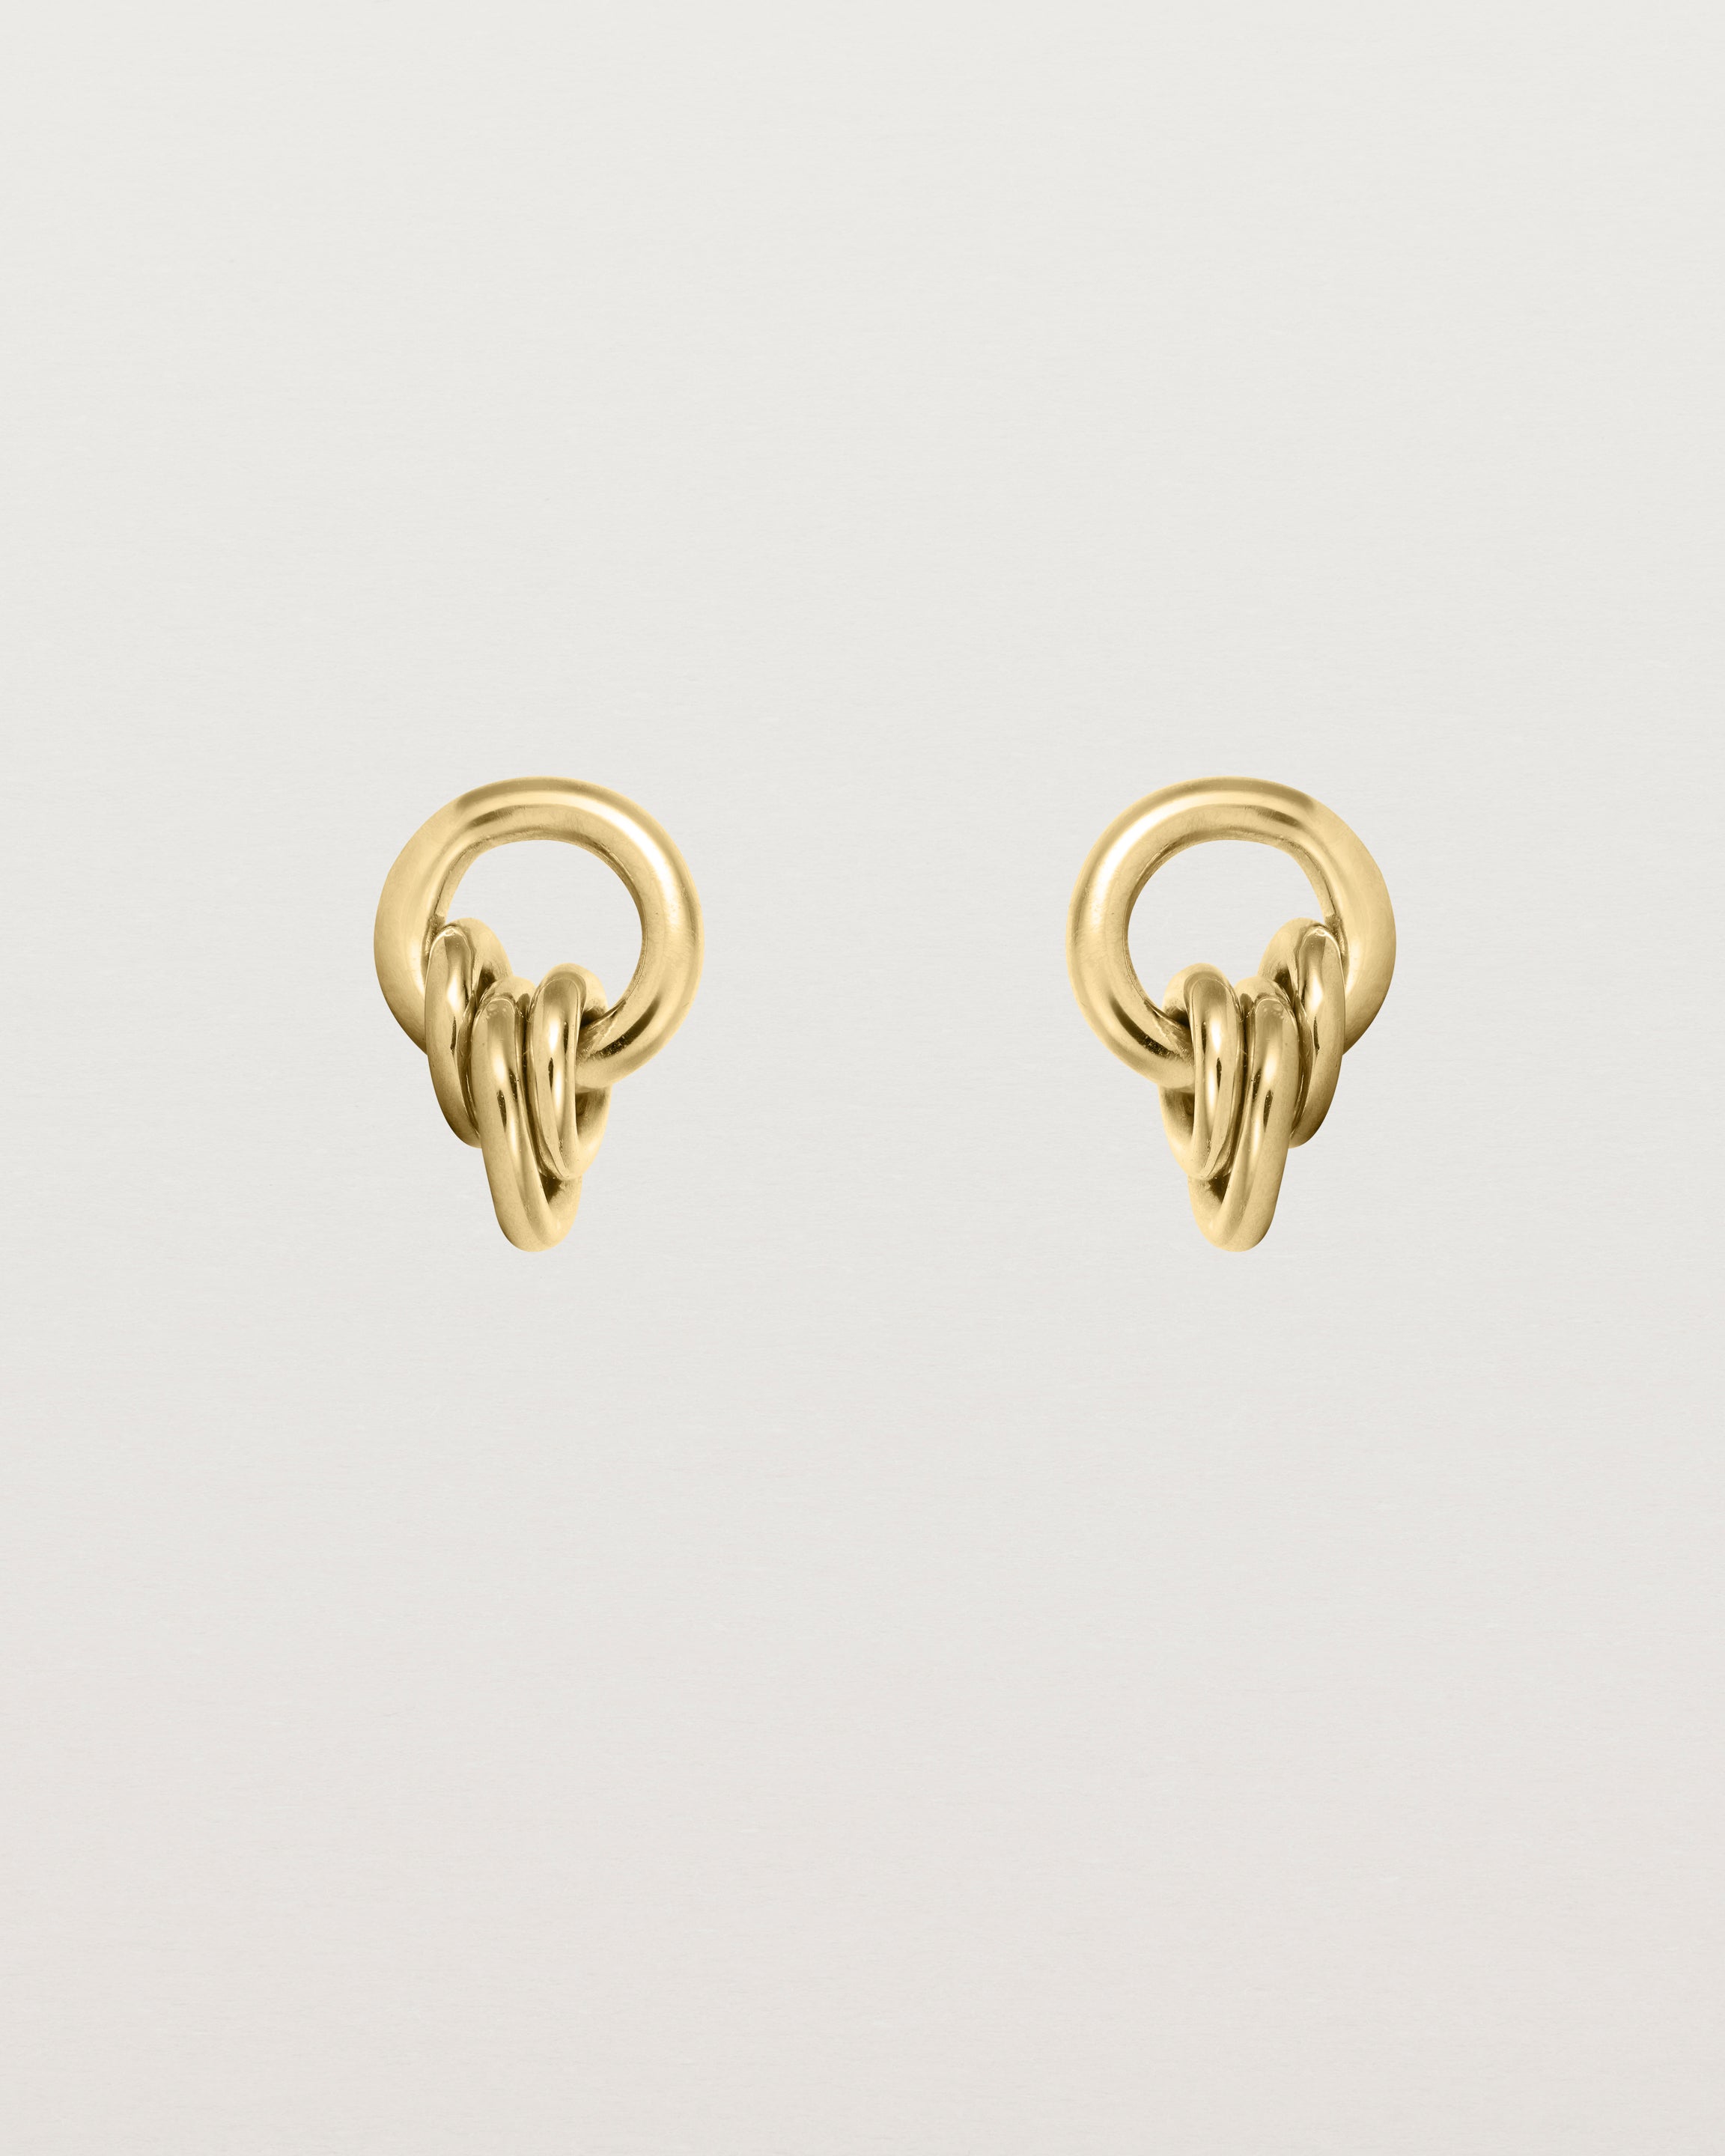 A pair of yellow gold studs with three mini hoops attached